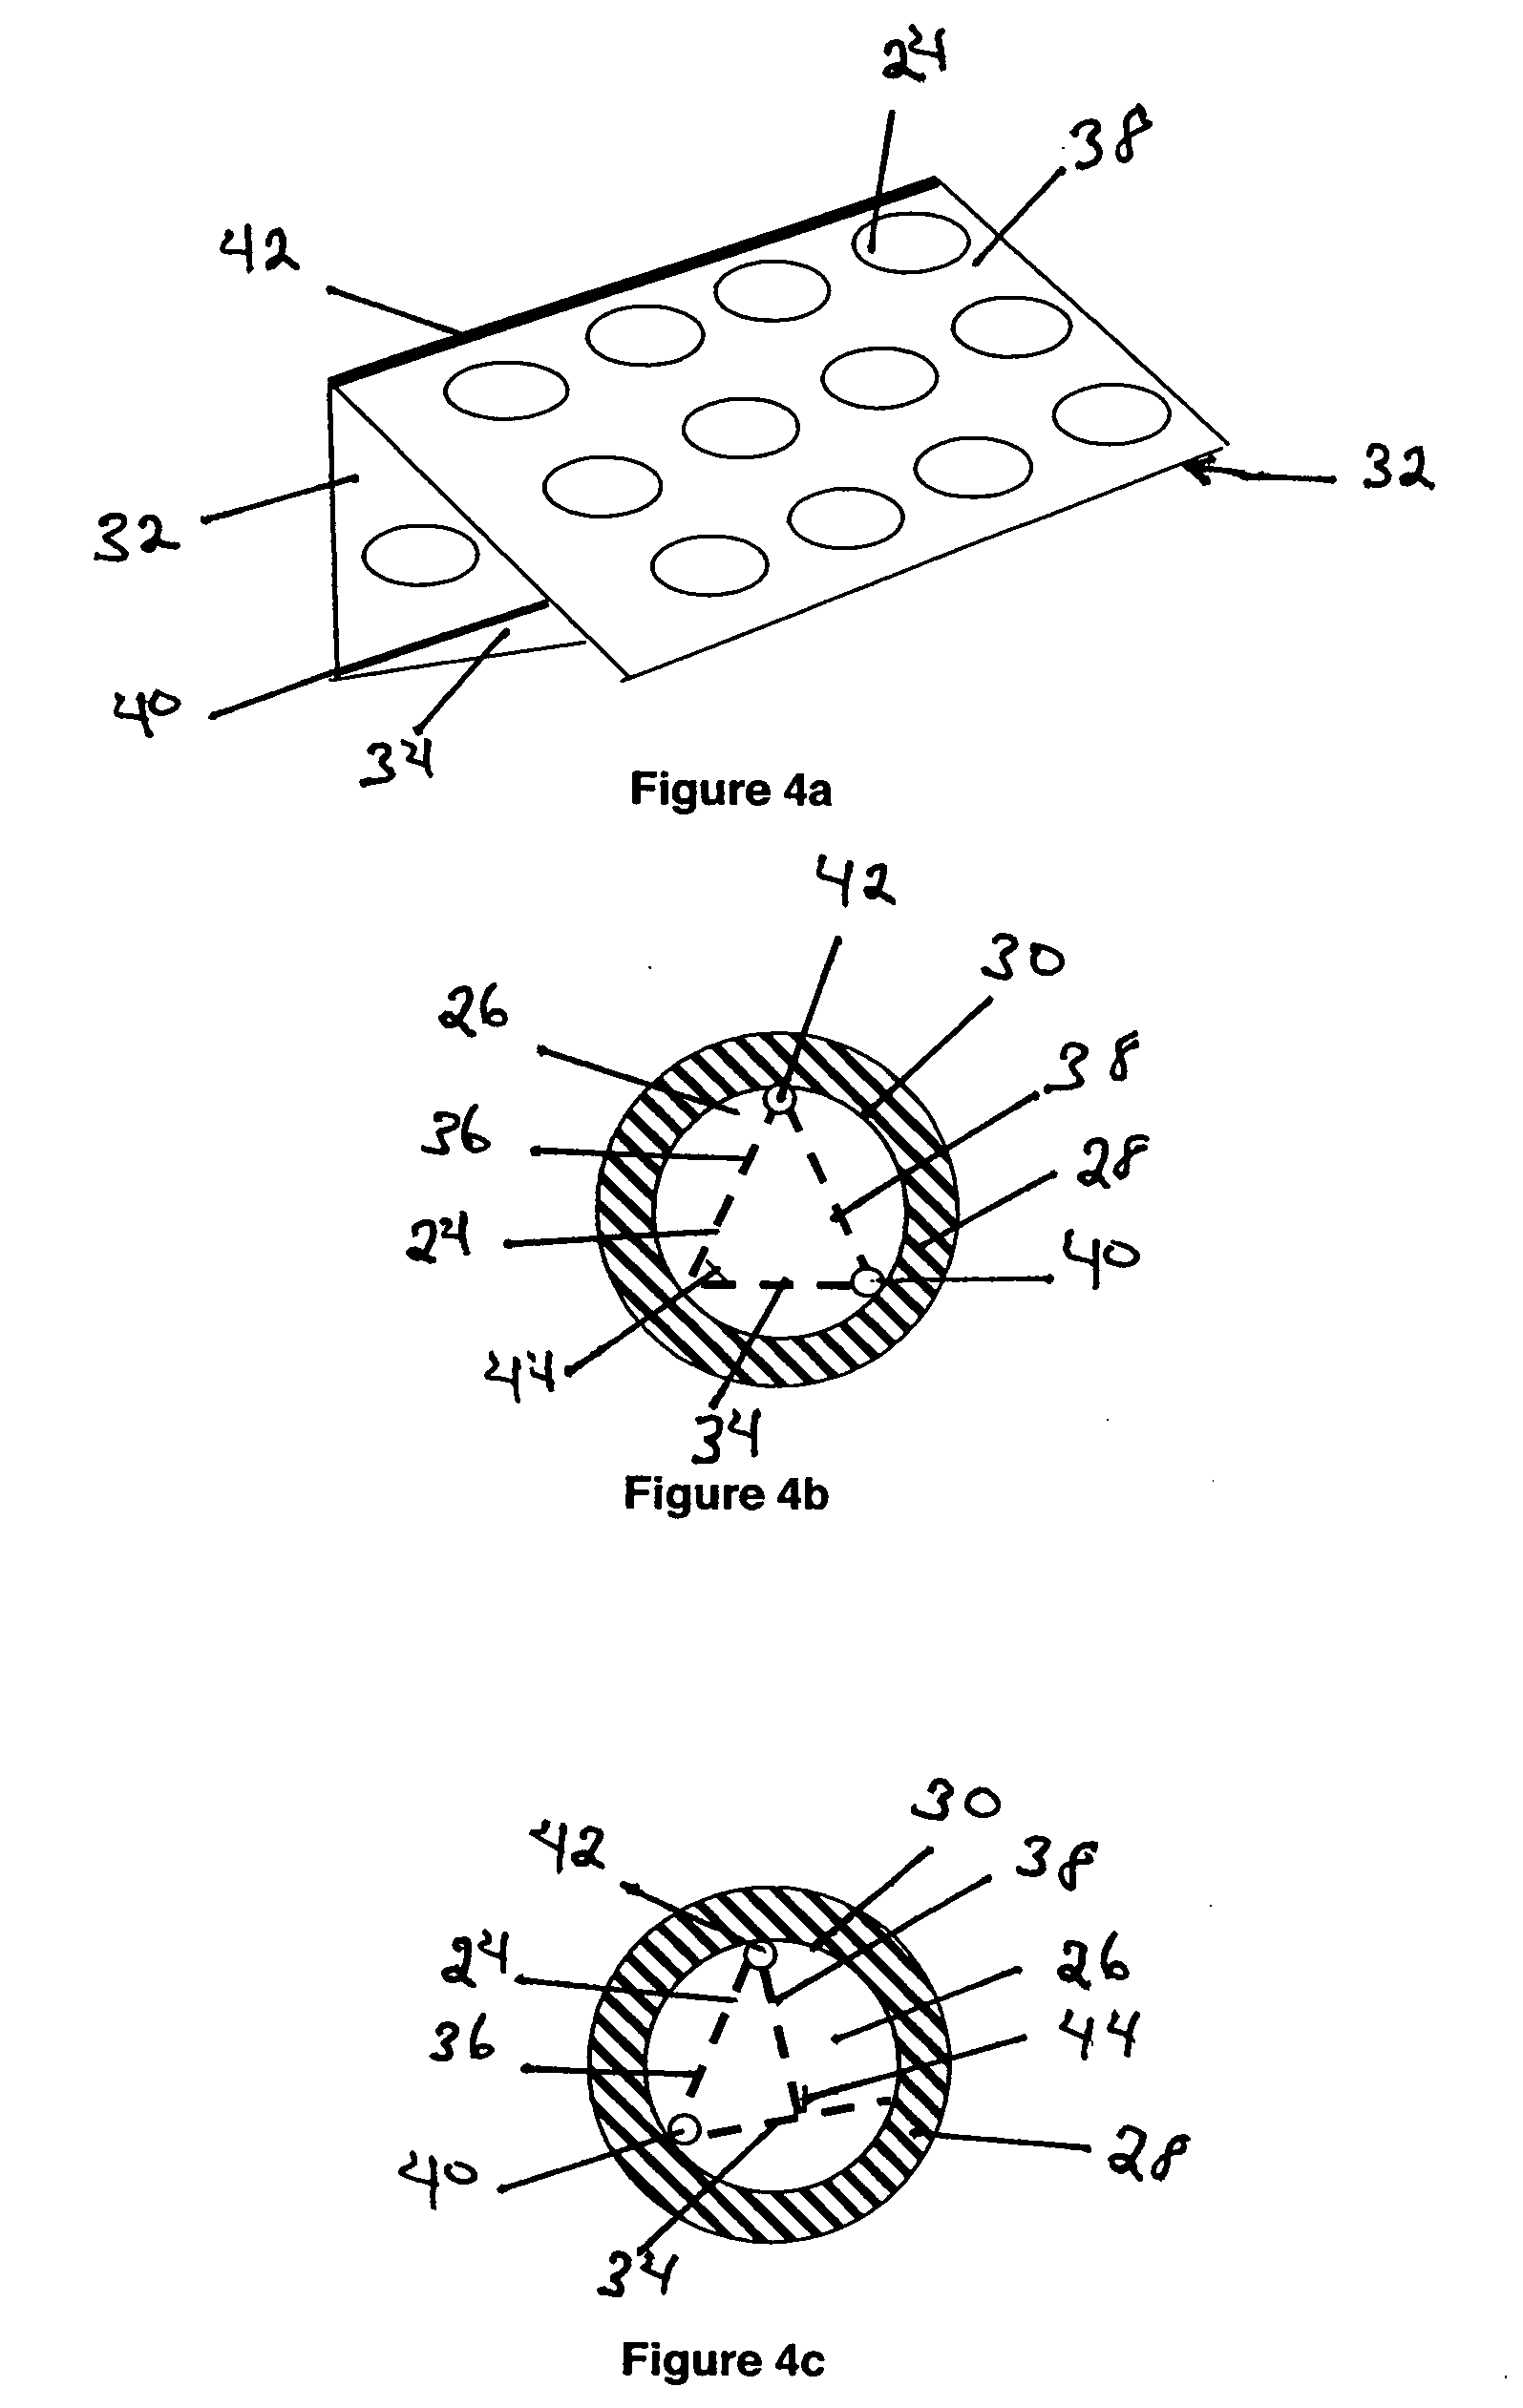 Bone implant device and methods of using same